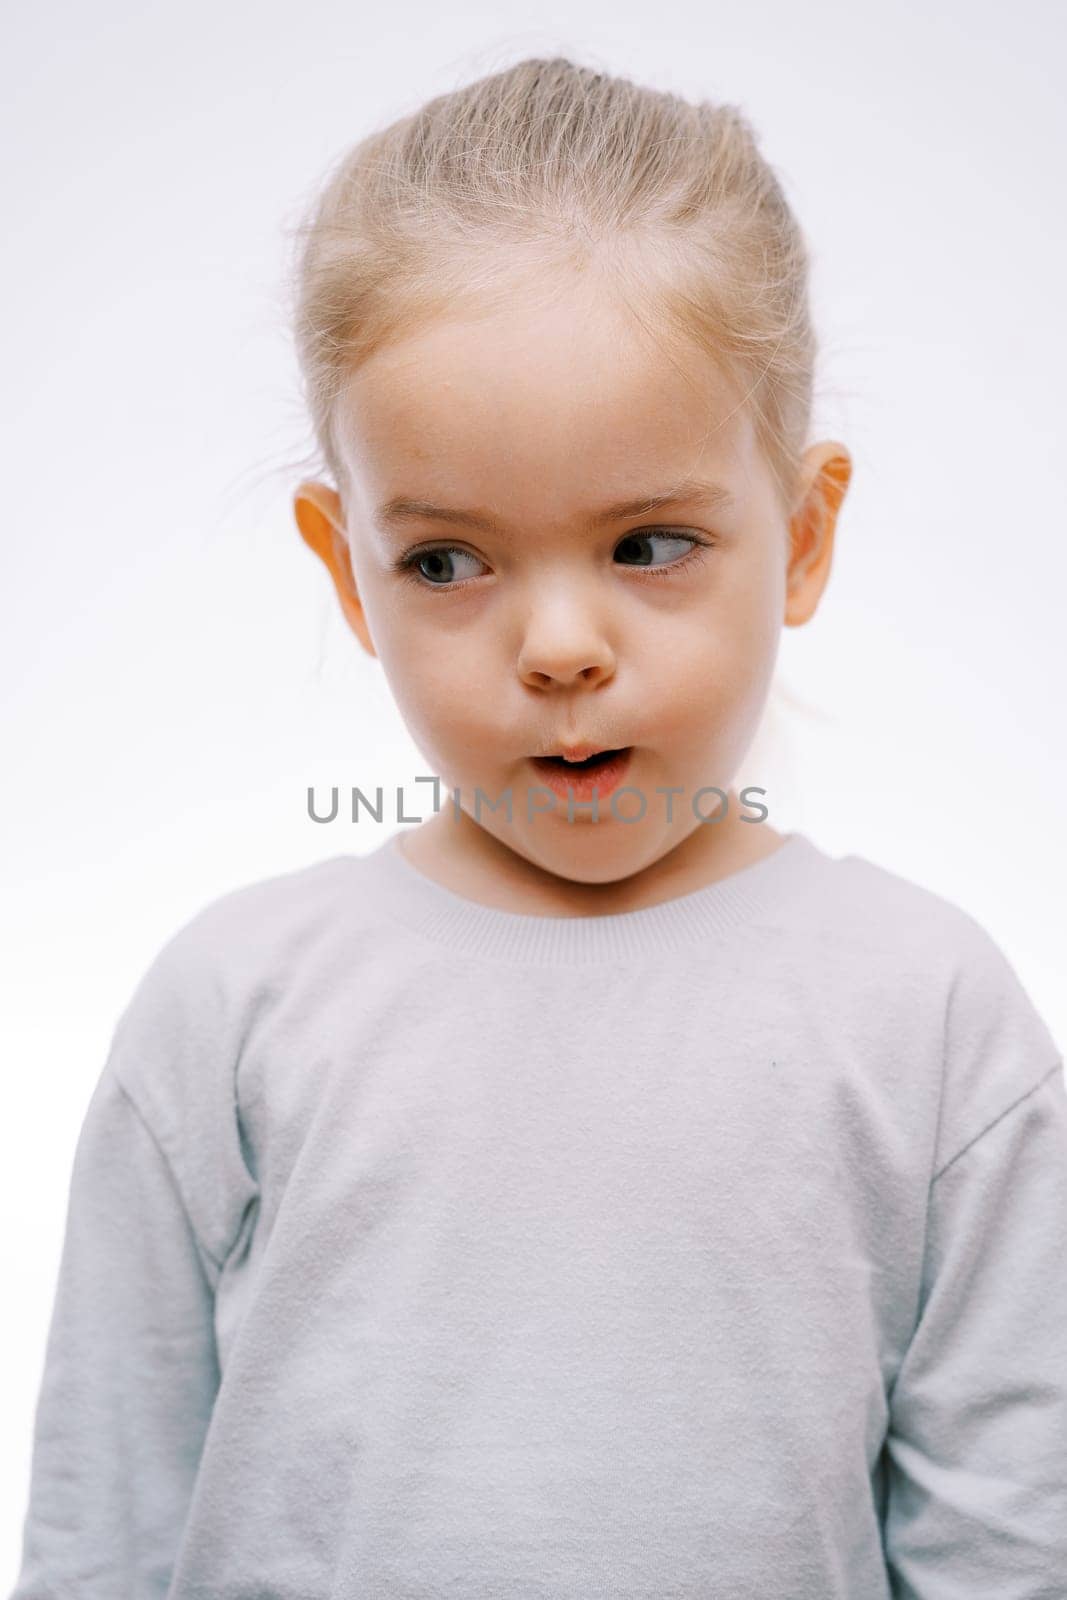 Portrait of a little surprised girl with her mouth open looking to the side on a gray background. High quality photo